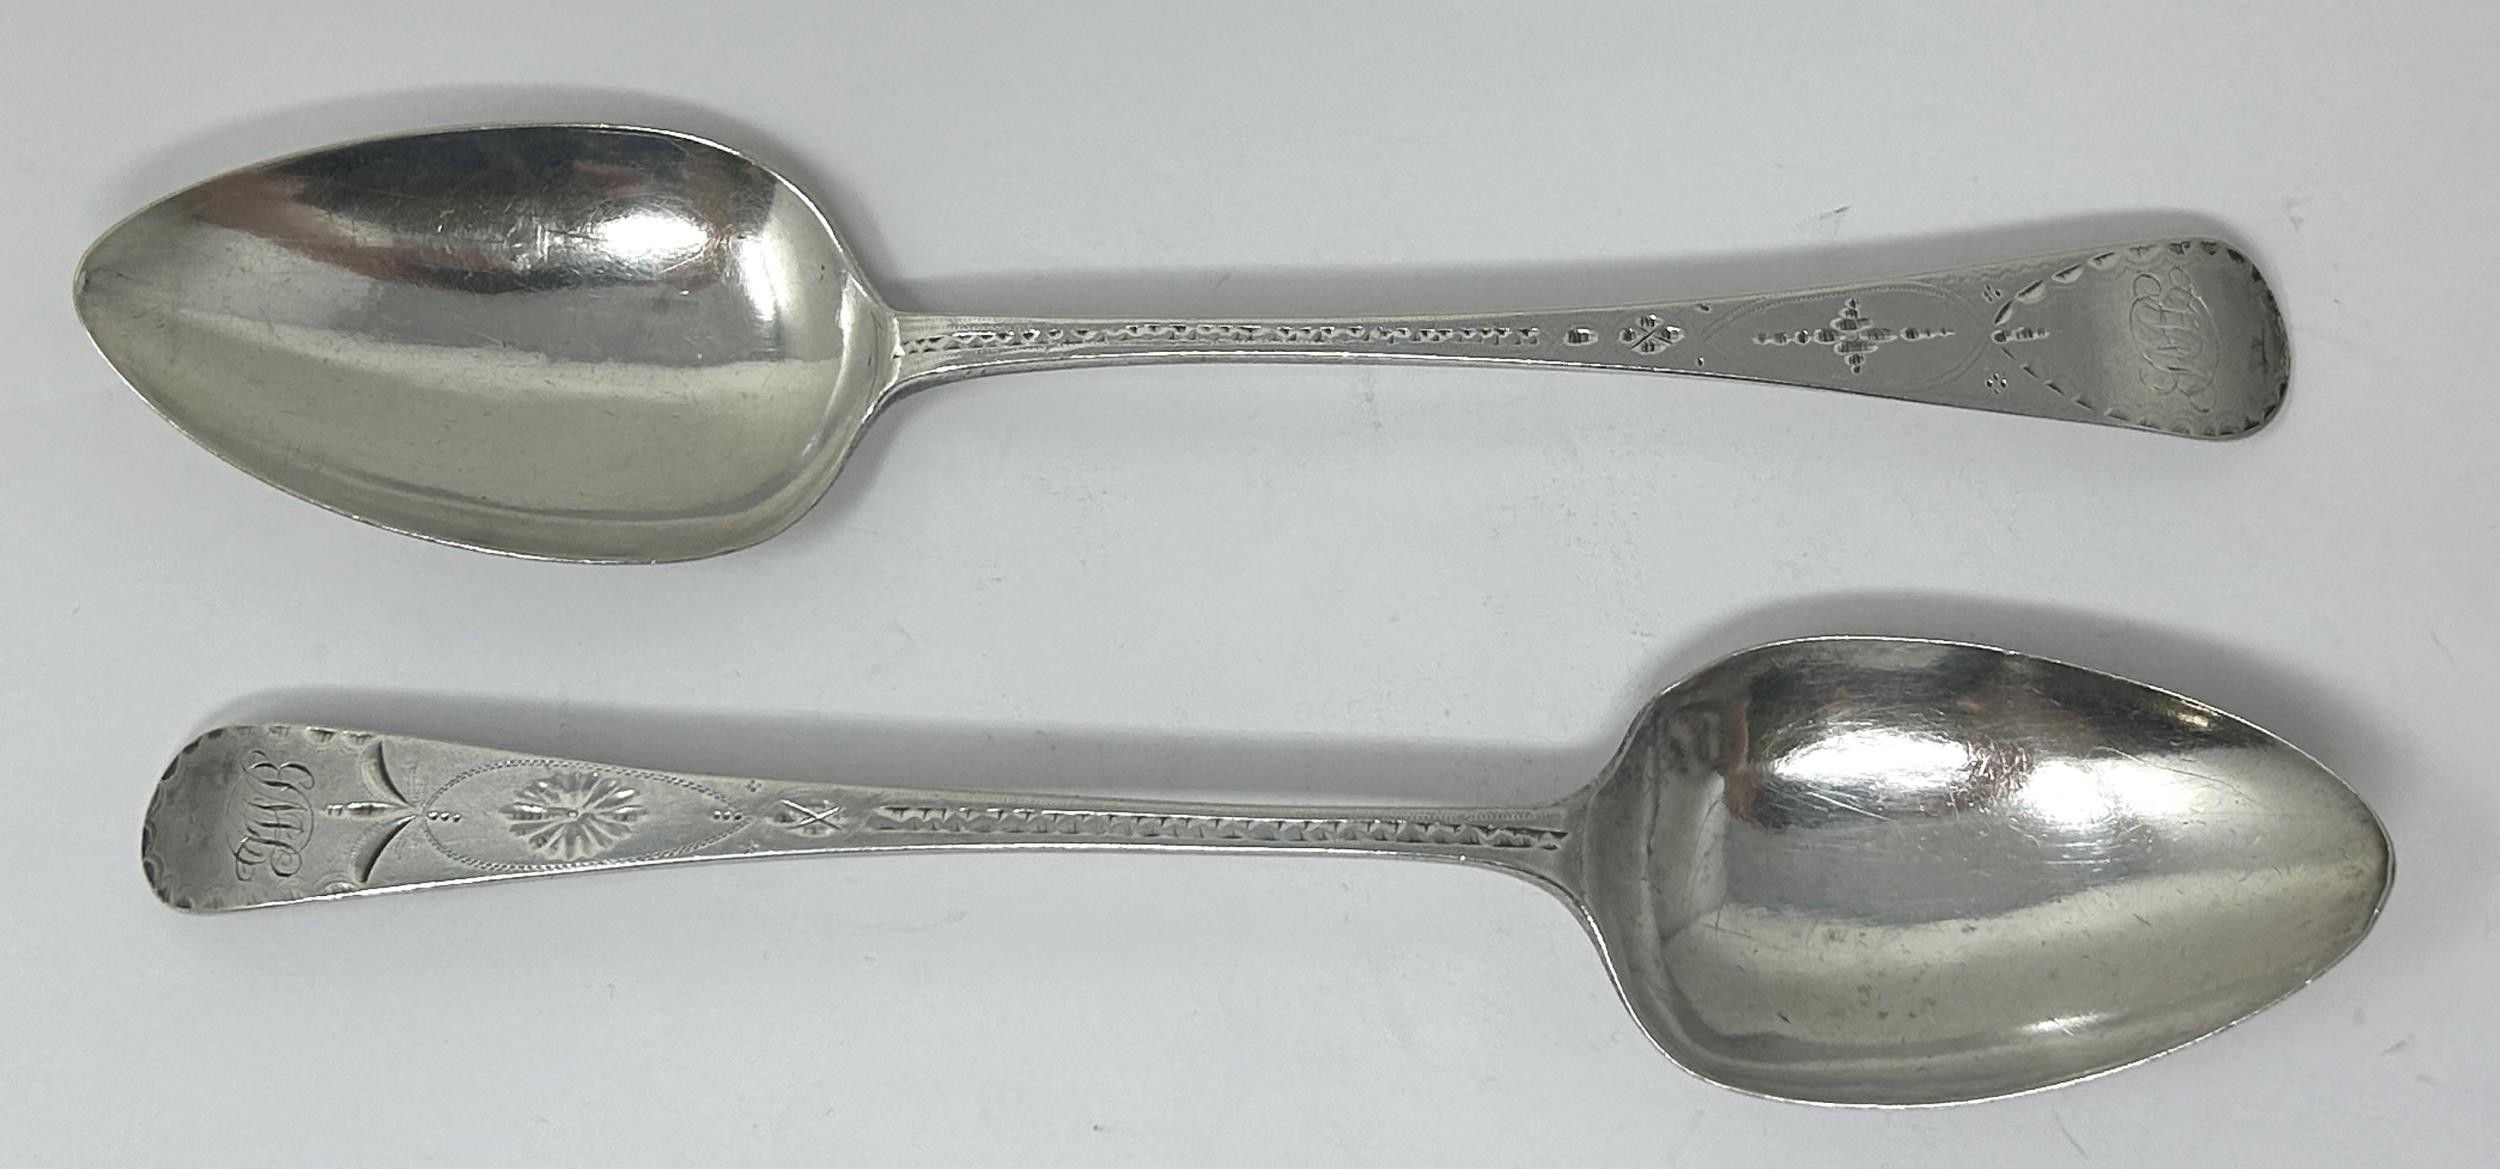 A pair of George III silver Old English pattern spoons, marks rubbed, 3.2 ozt